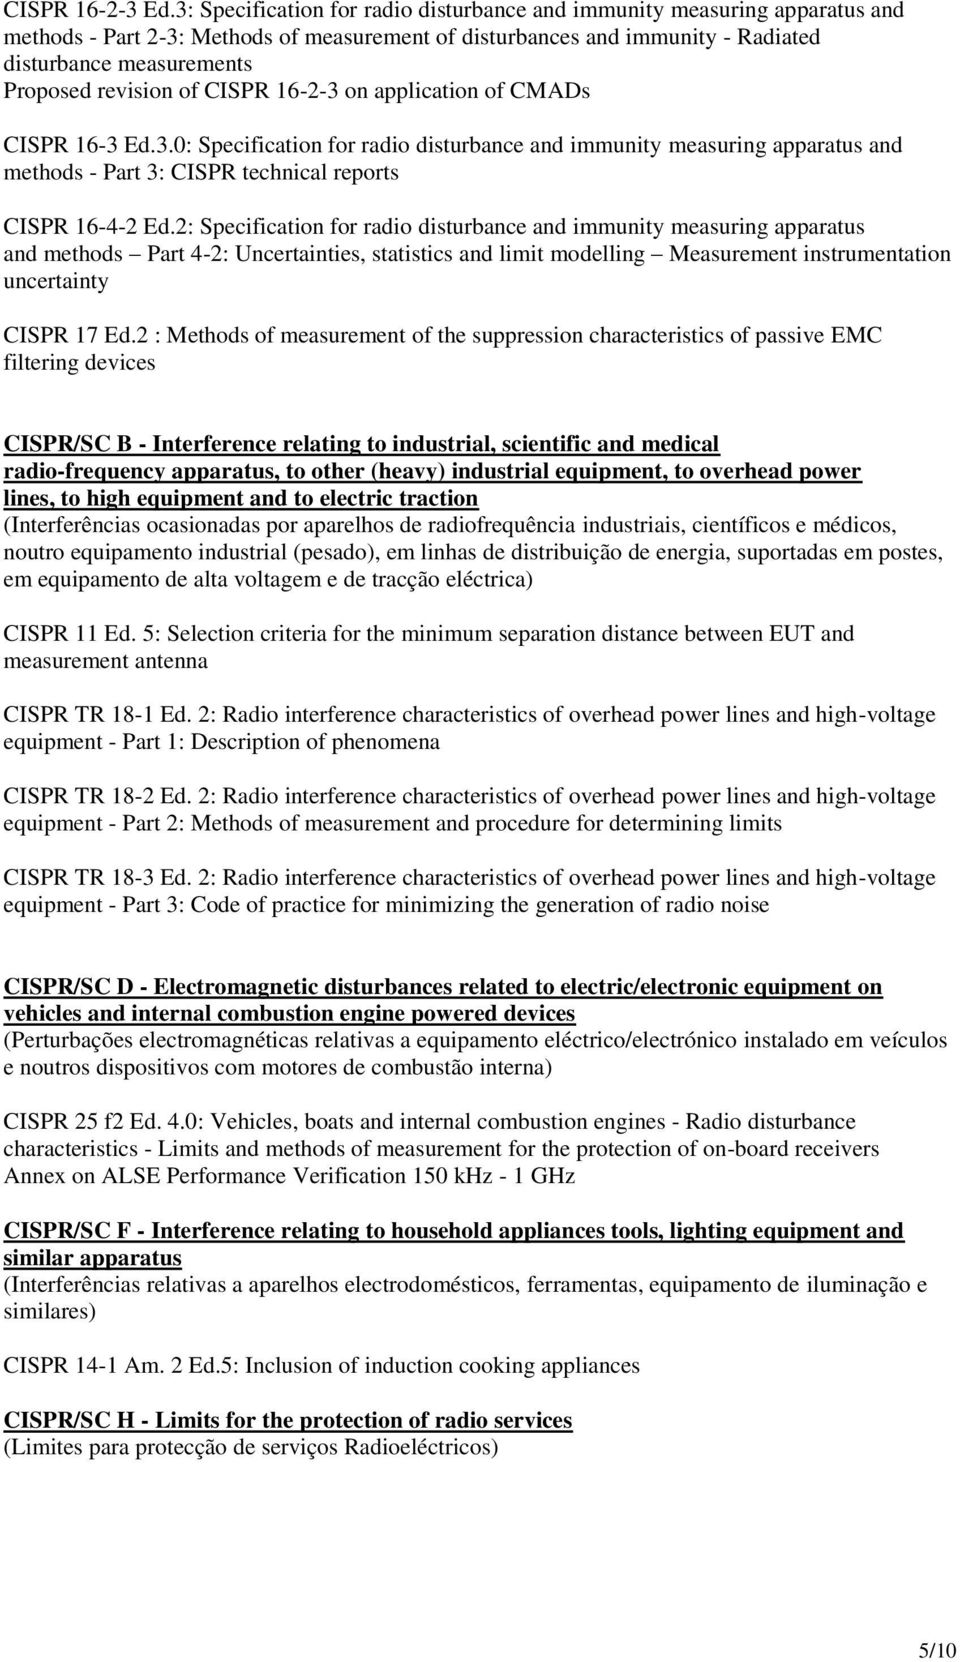 revision of CISPR 16-2-3 on application of CMADs CISPR 16-3 Ed.3.0: Specification for radio disturbance and immunity measuring apparatus and methods - Part 3: CISPR technical reports CISPR 16-4-2 Ed.